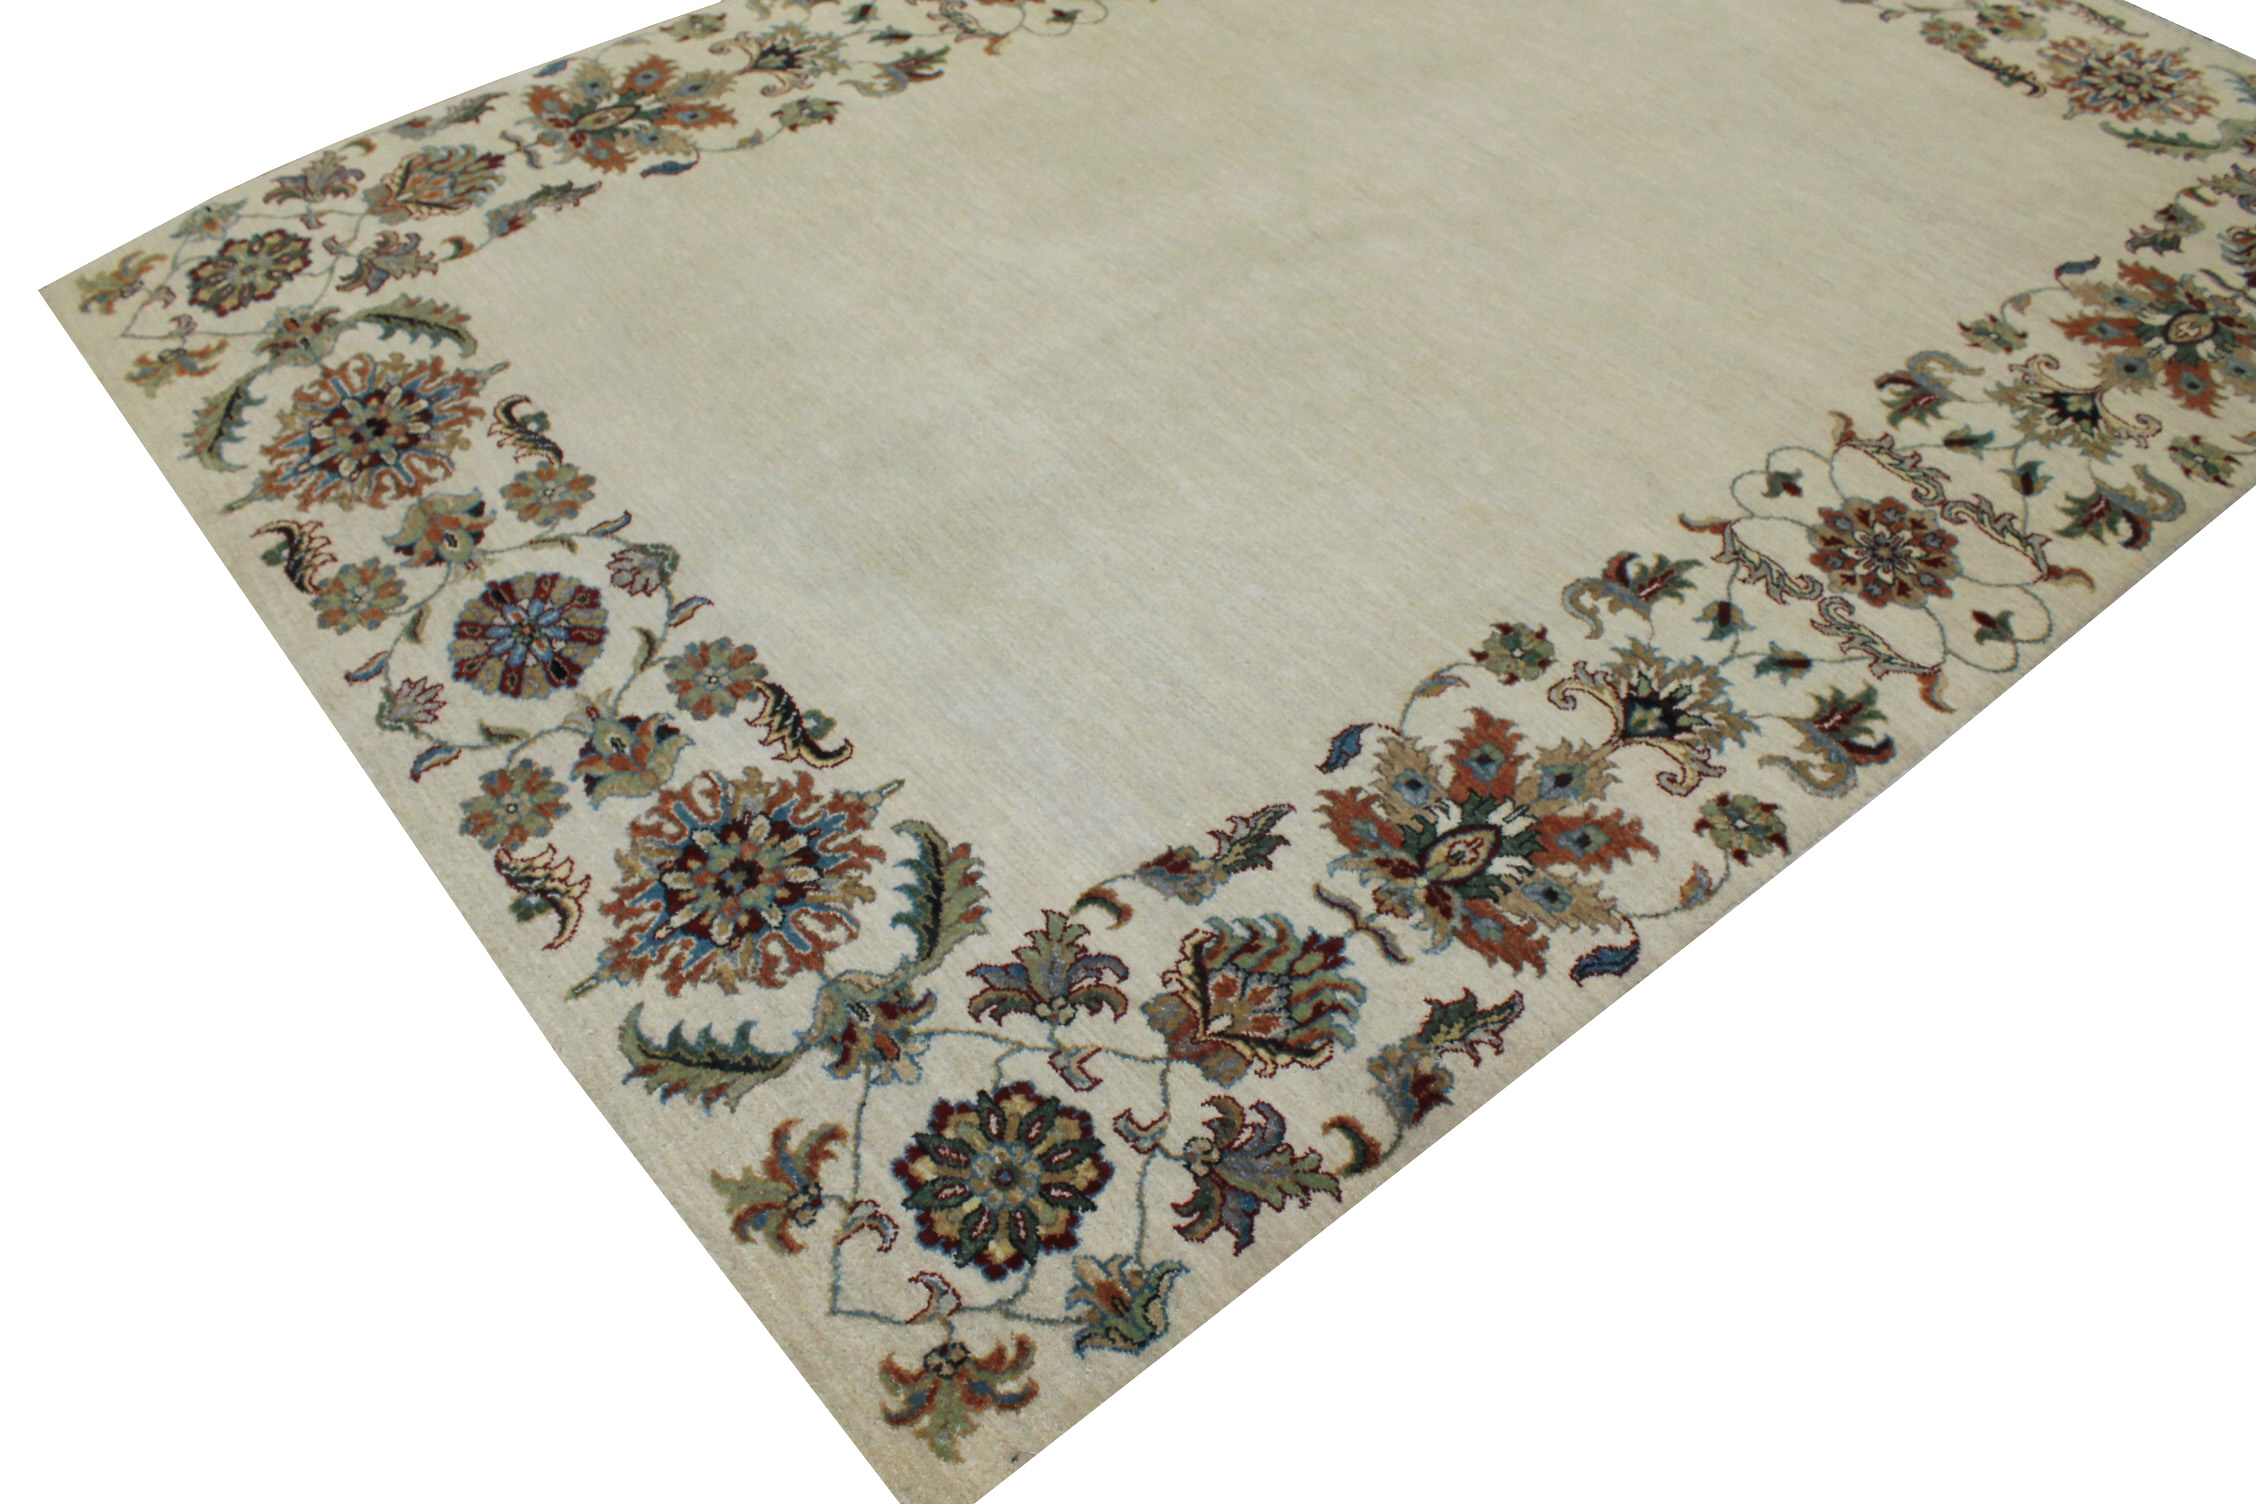 5x7/8 Traditional Hand Knotted Wool Area Rug - MR16580